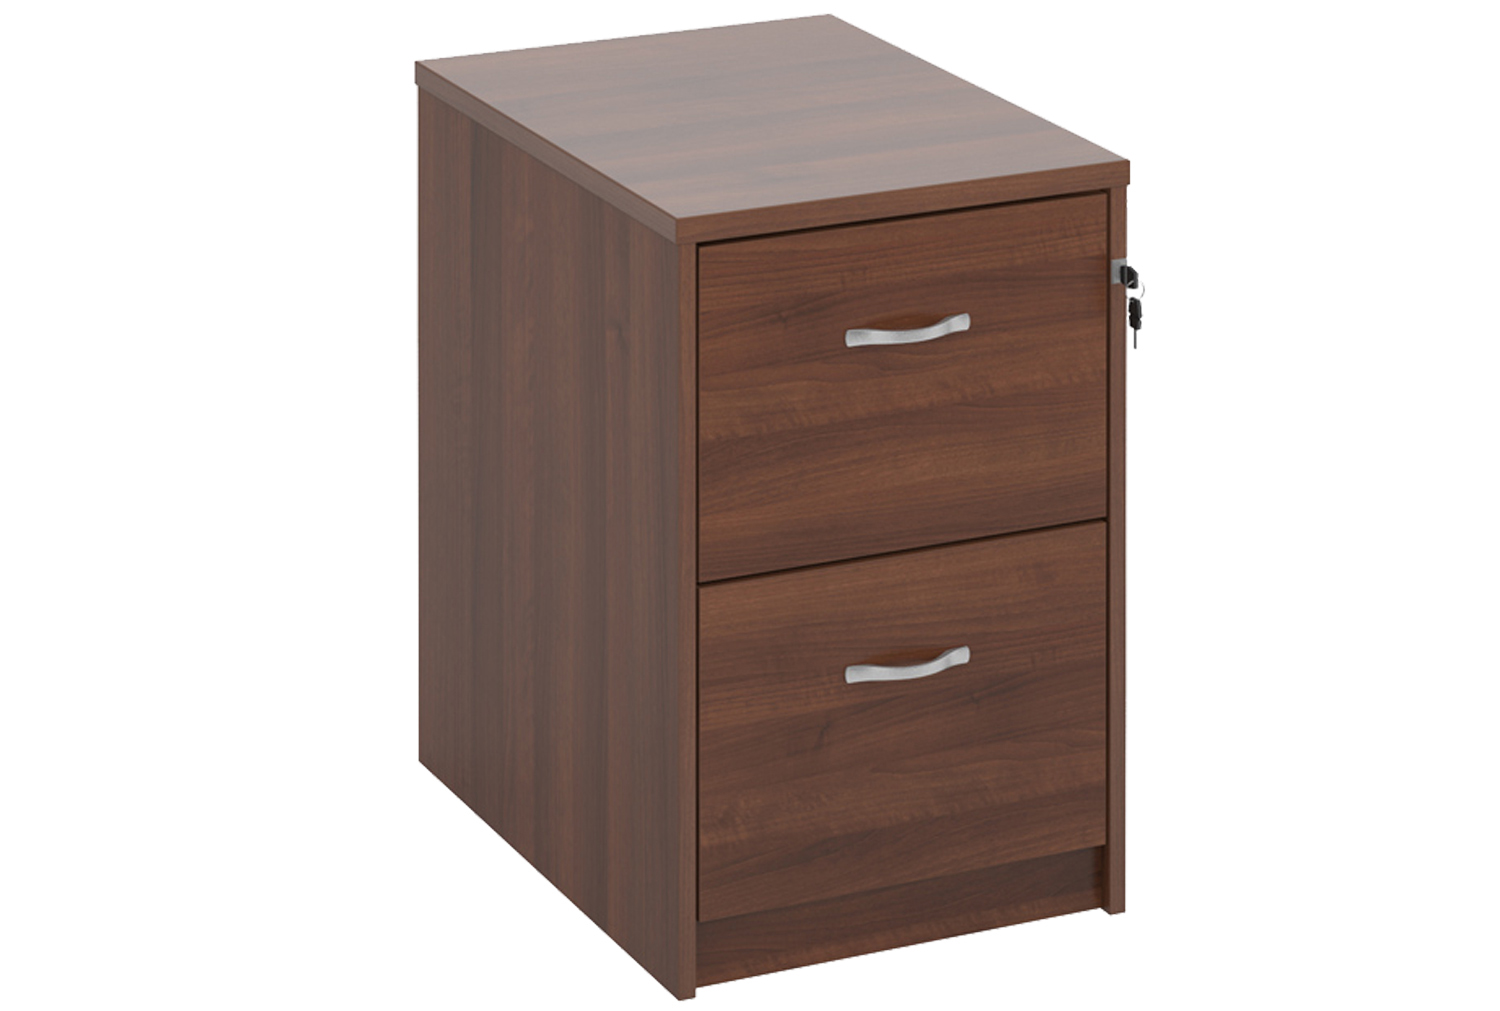 Tully Filing Cabinets, 2 Drawer - 48wx66dx73h (cm), Walnut, Fully Installed